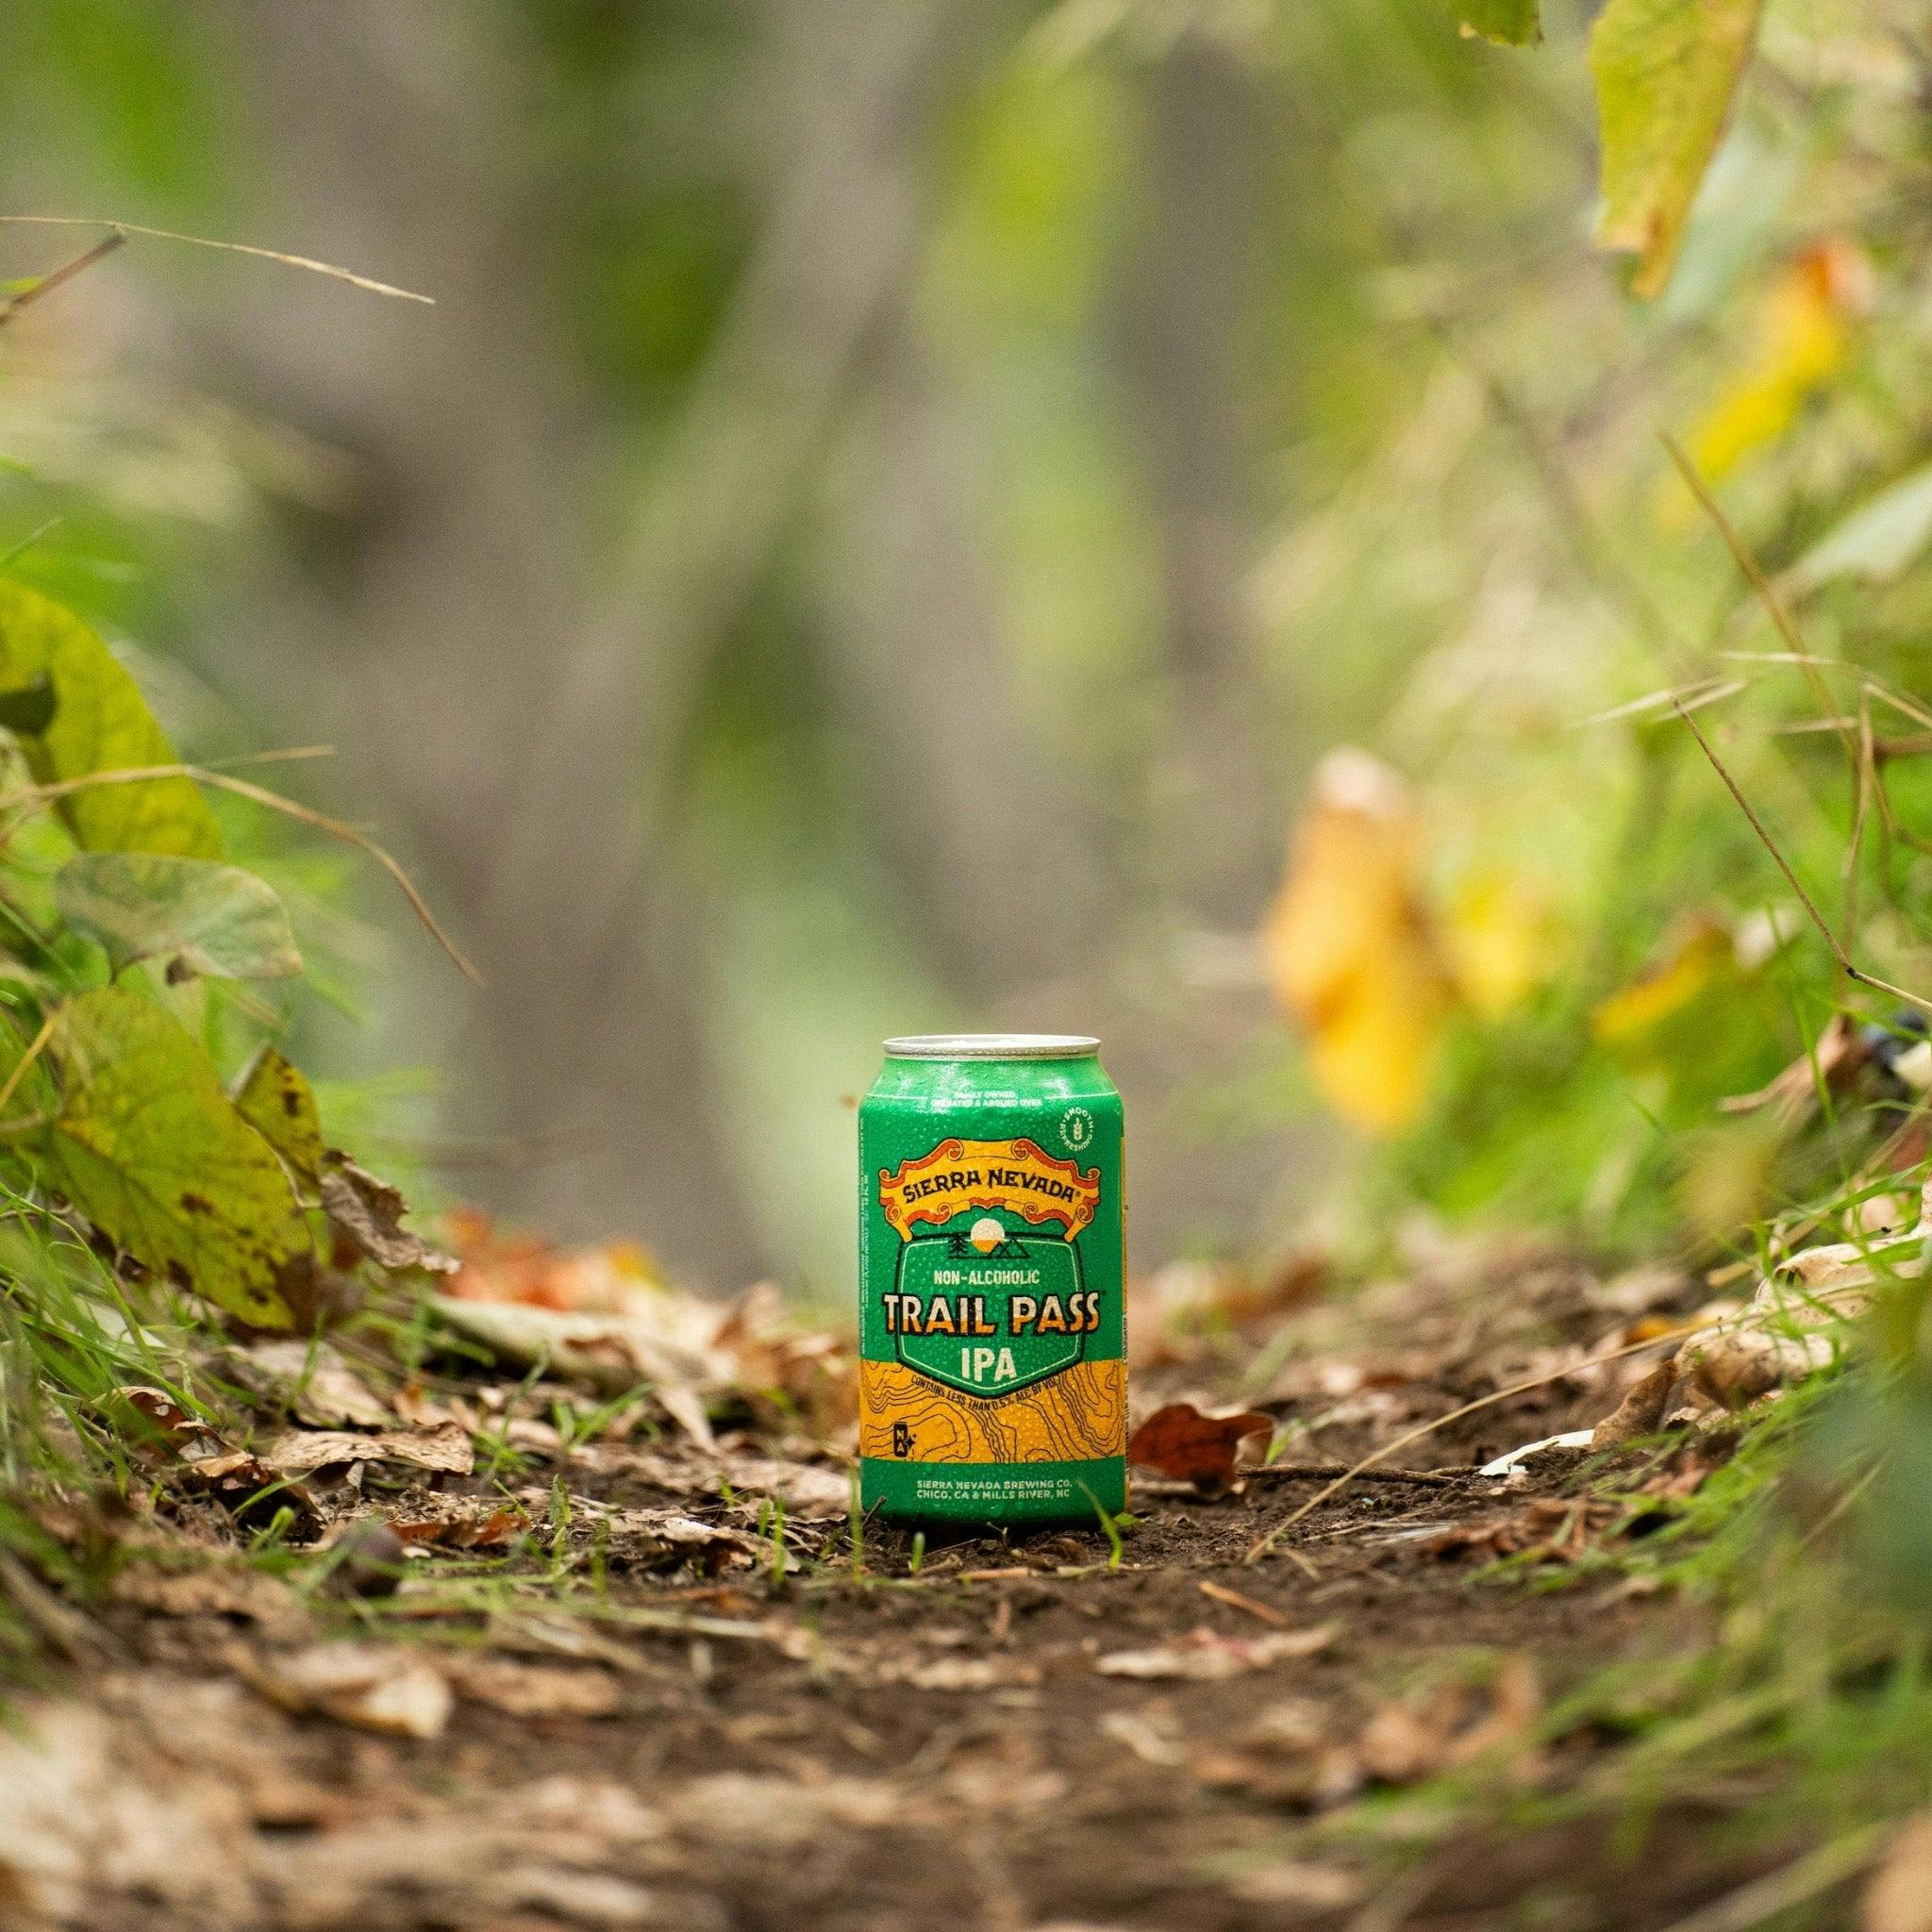 Sierra Nevada Brewing Co. Trail Pass IPA Non-Alcoholic Brew - A refreshing can of Trail Pass IPA sits in the middle of a wooded hiking trail.